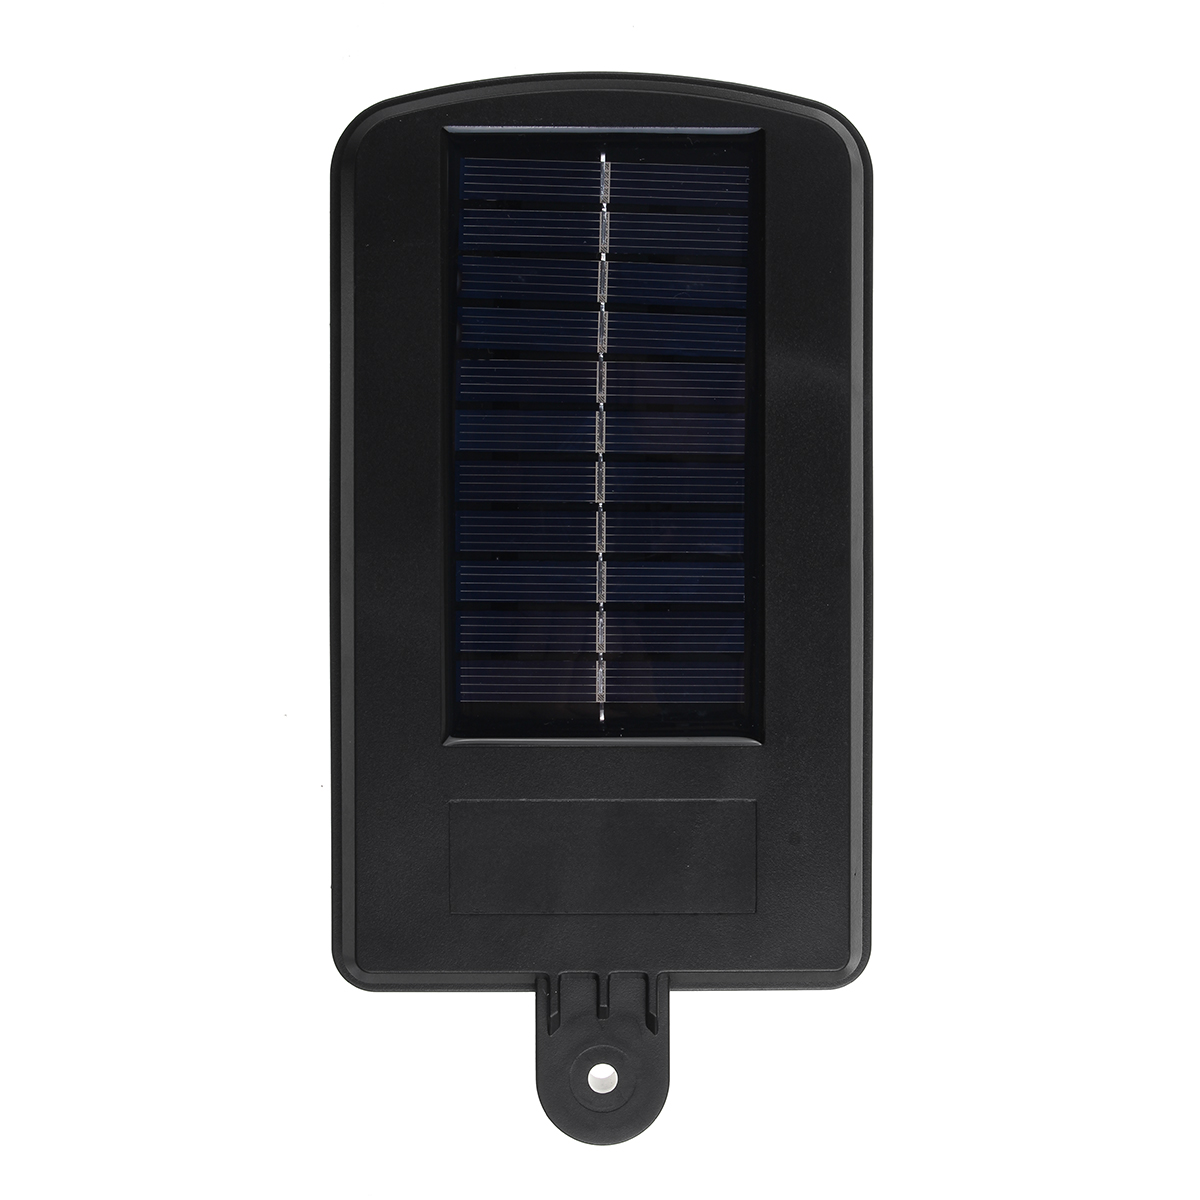 Find 80W LED COB Solar Light PIR Motion Sensor IP65 Waterproof Solar Wall Lamp With Remote Control For Outdoor Yard Garden Security Light for Sale on Gipsybee.com with cryptocurrencies